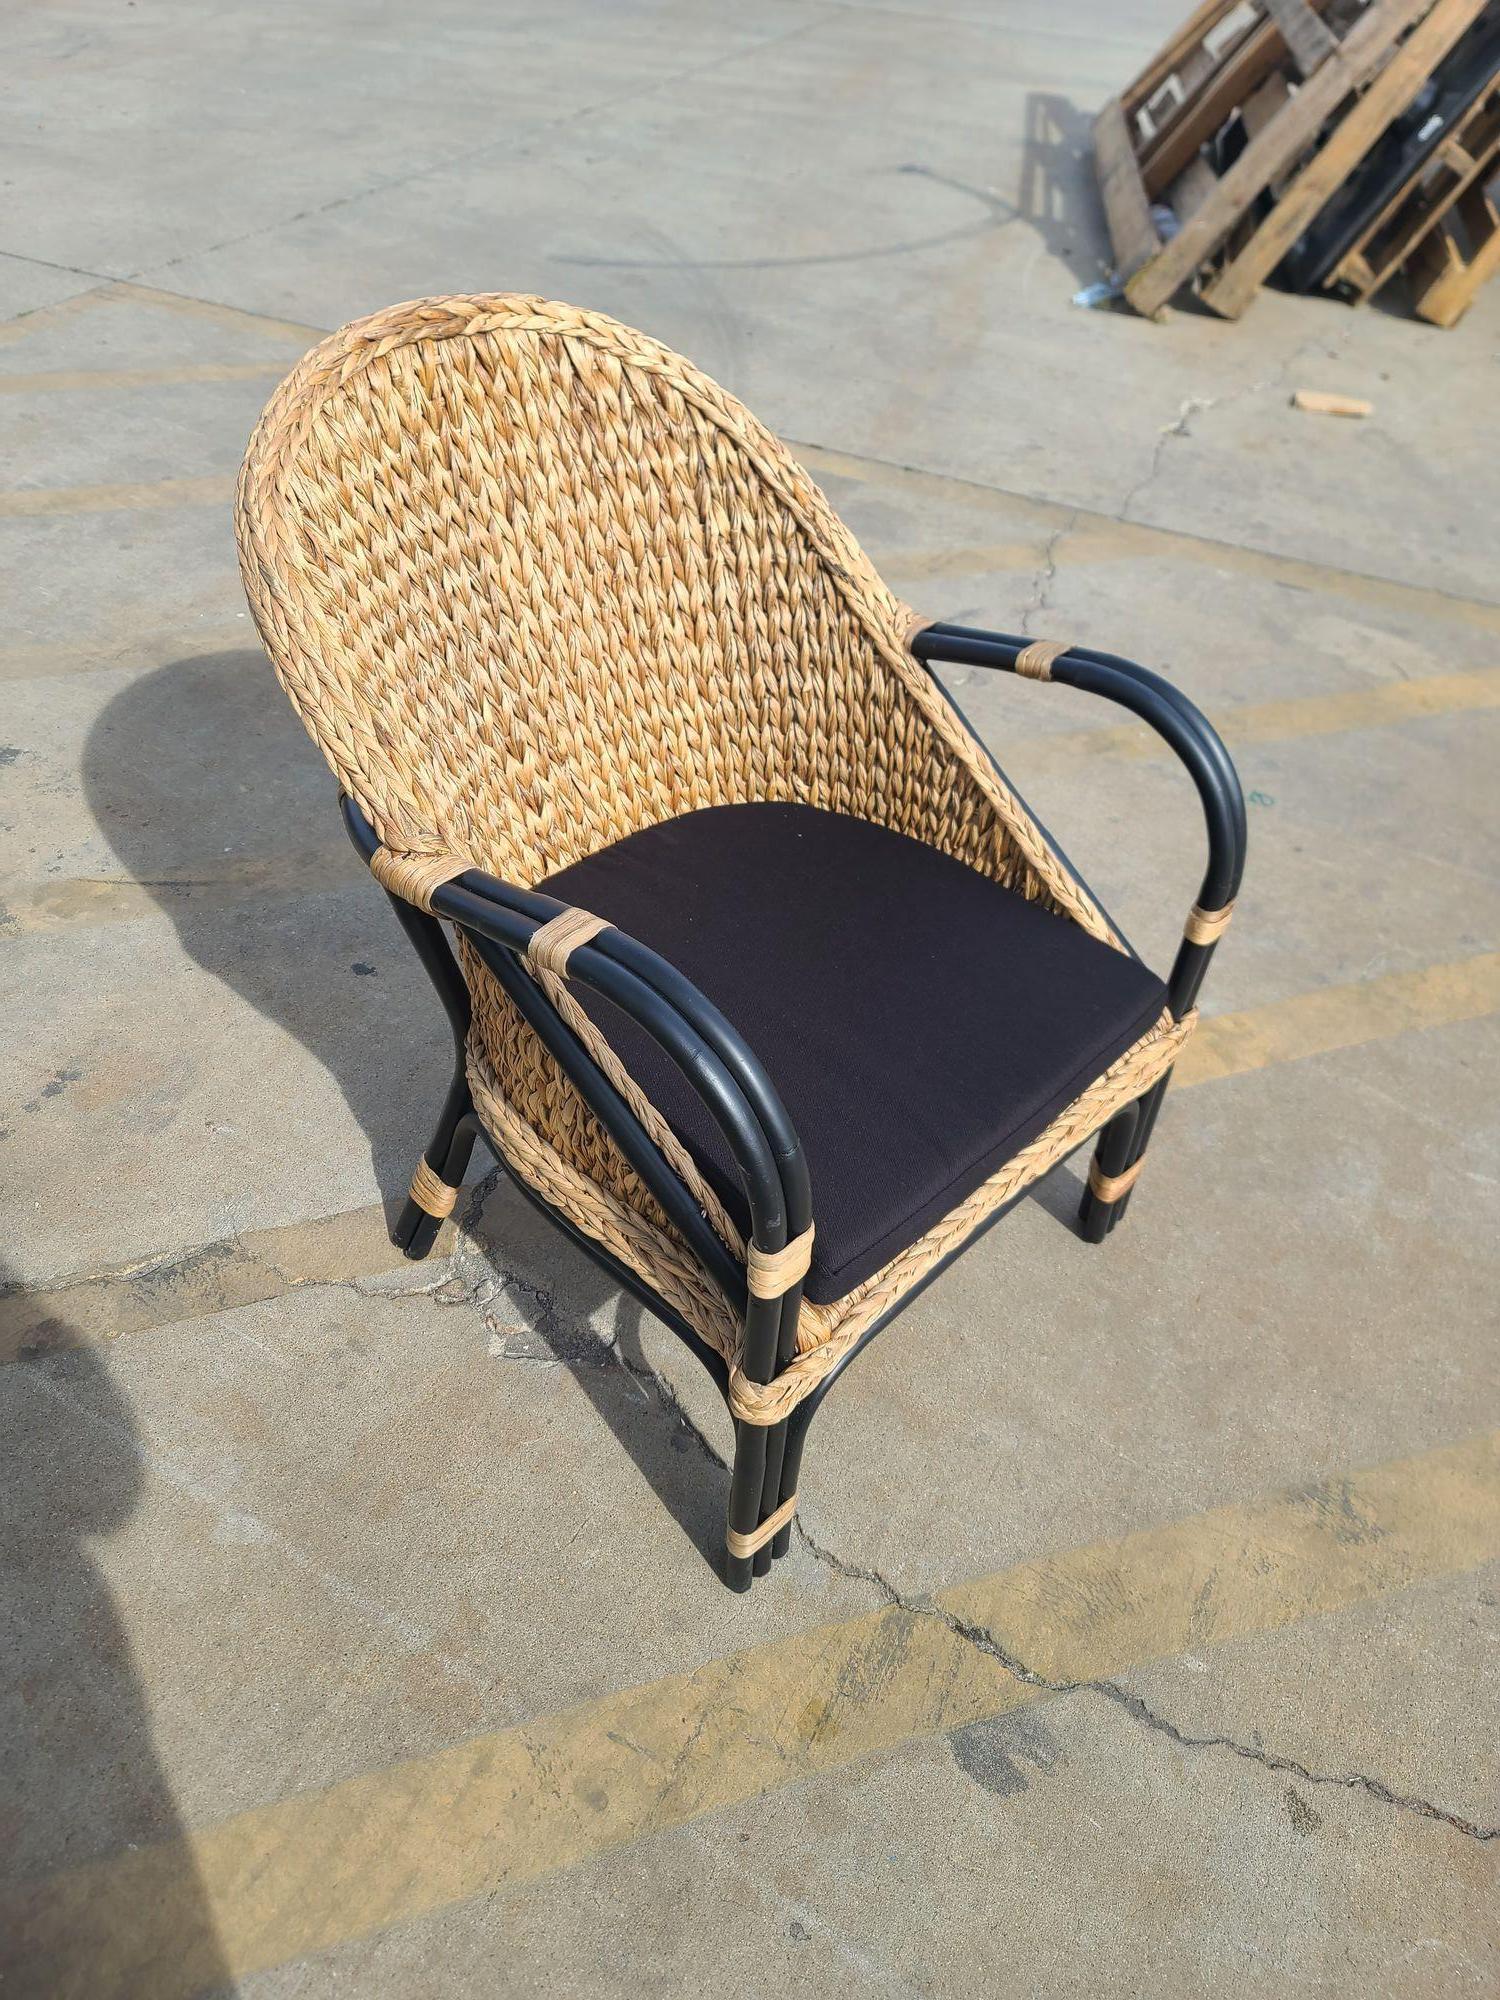 Black rattan Armchair/dining chair with natural wicker fan seat including a cotton upholstery seat cushion. The chair features a chic 1990s Modern design with natural colored Wicker wrapped and a period two-tone look. 
New-Old-Stock, Available 8,